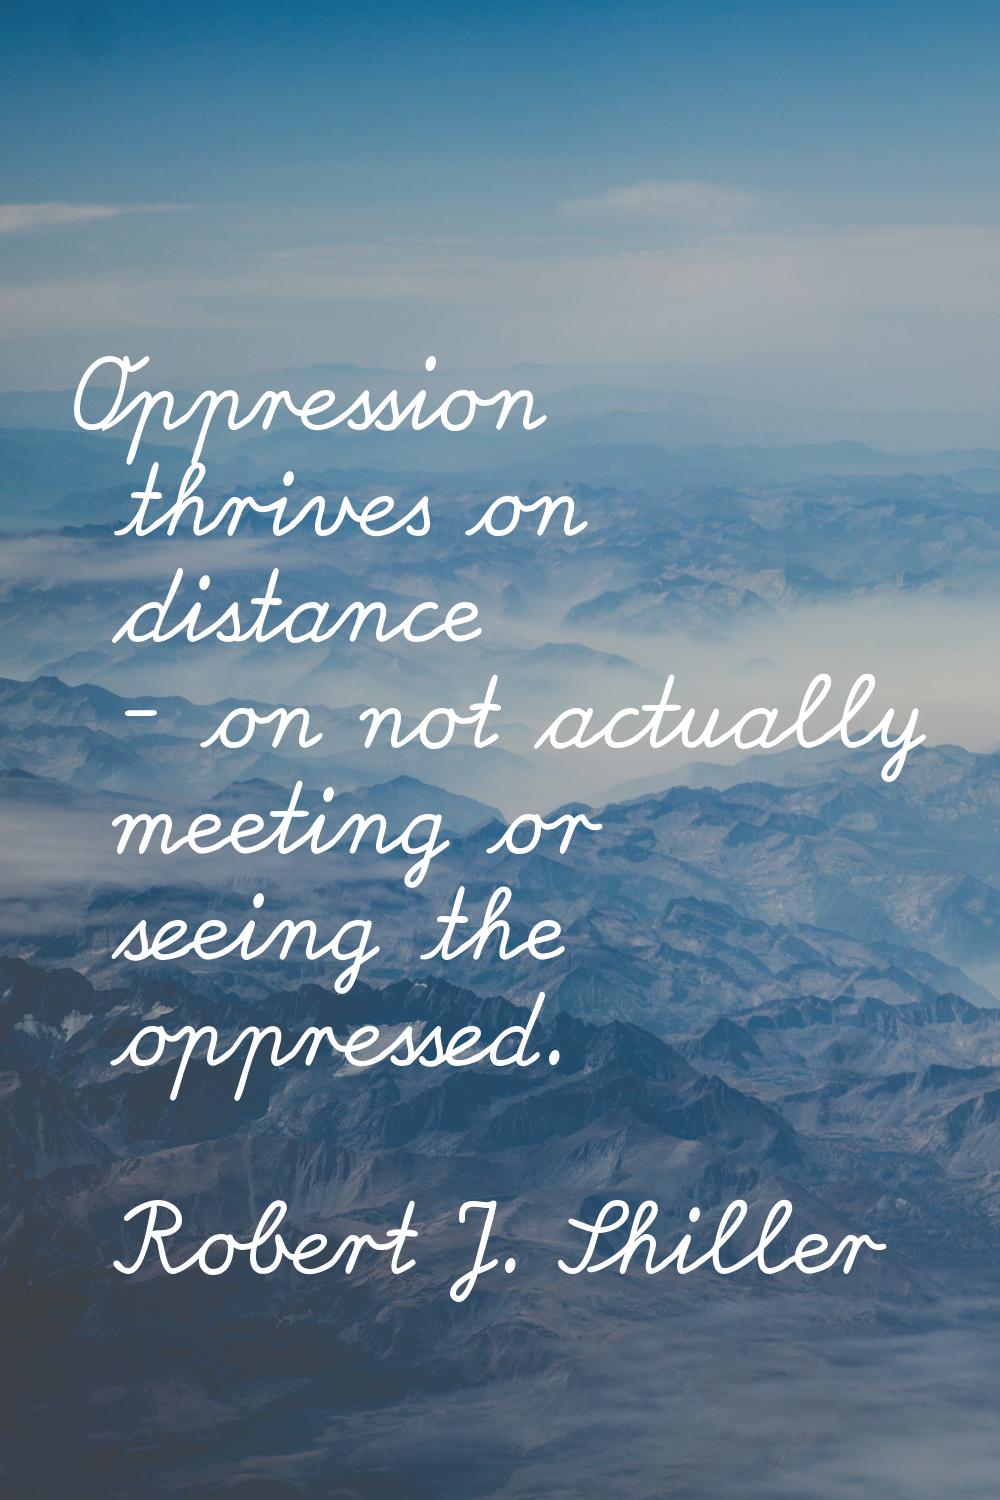 Oppression thrives on distance - on not actually meeting or seeing the oppressed.